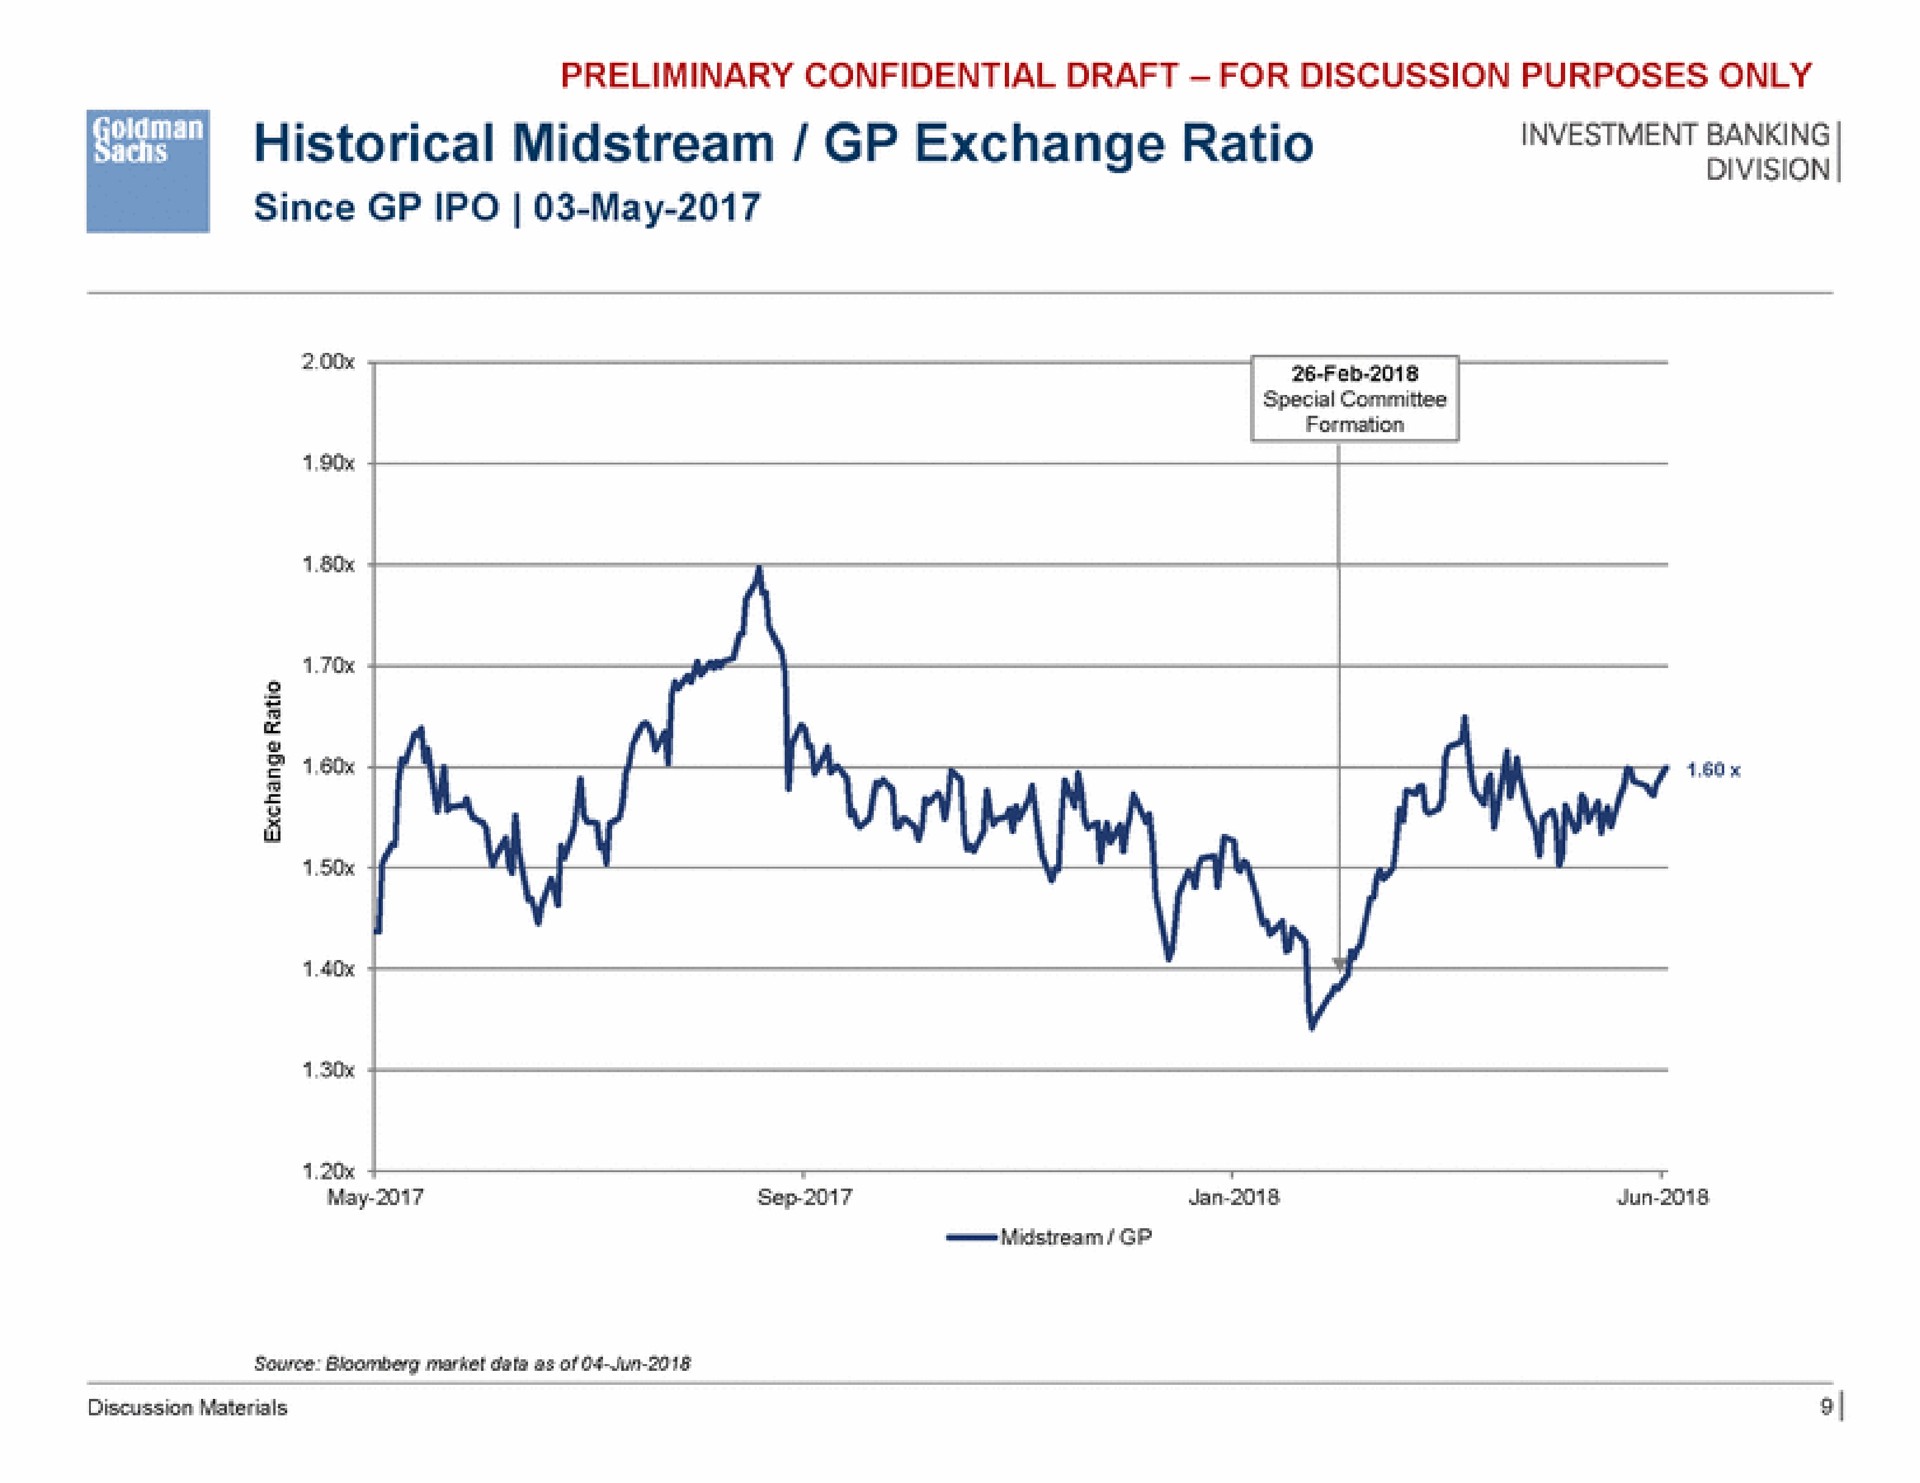 historical midstream exchange ratio since may a pat i | Goldman Sachs